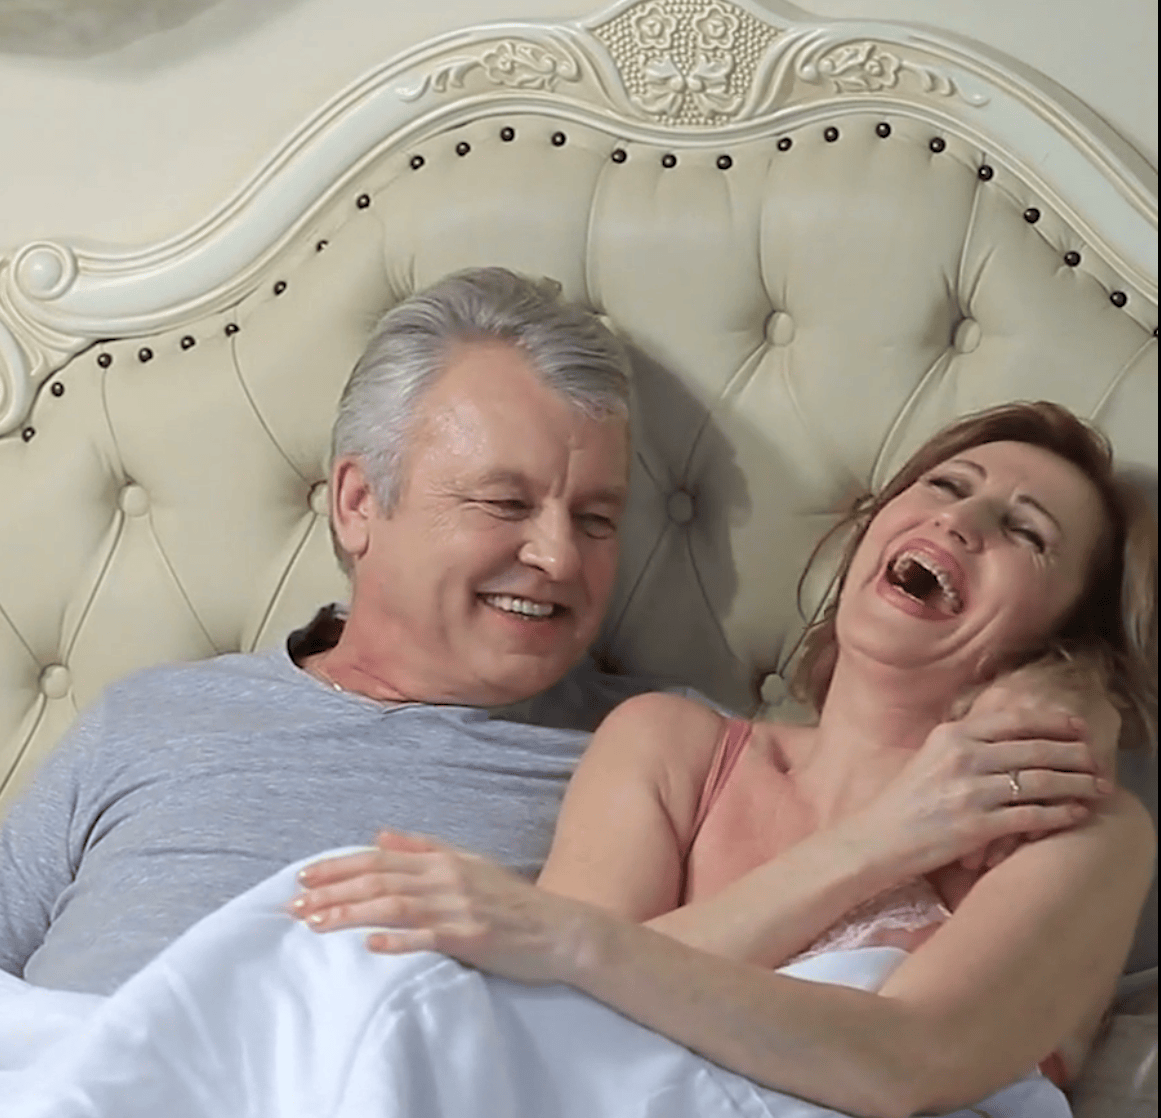 Happy couple in bed, symbolizing the regained joy and intimacy possible through Overflow Health's Erectile Dysfunction solutions